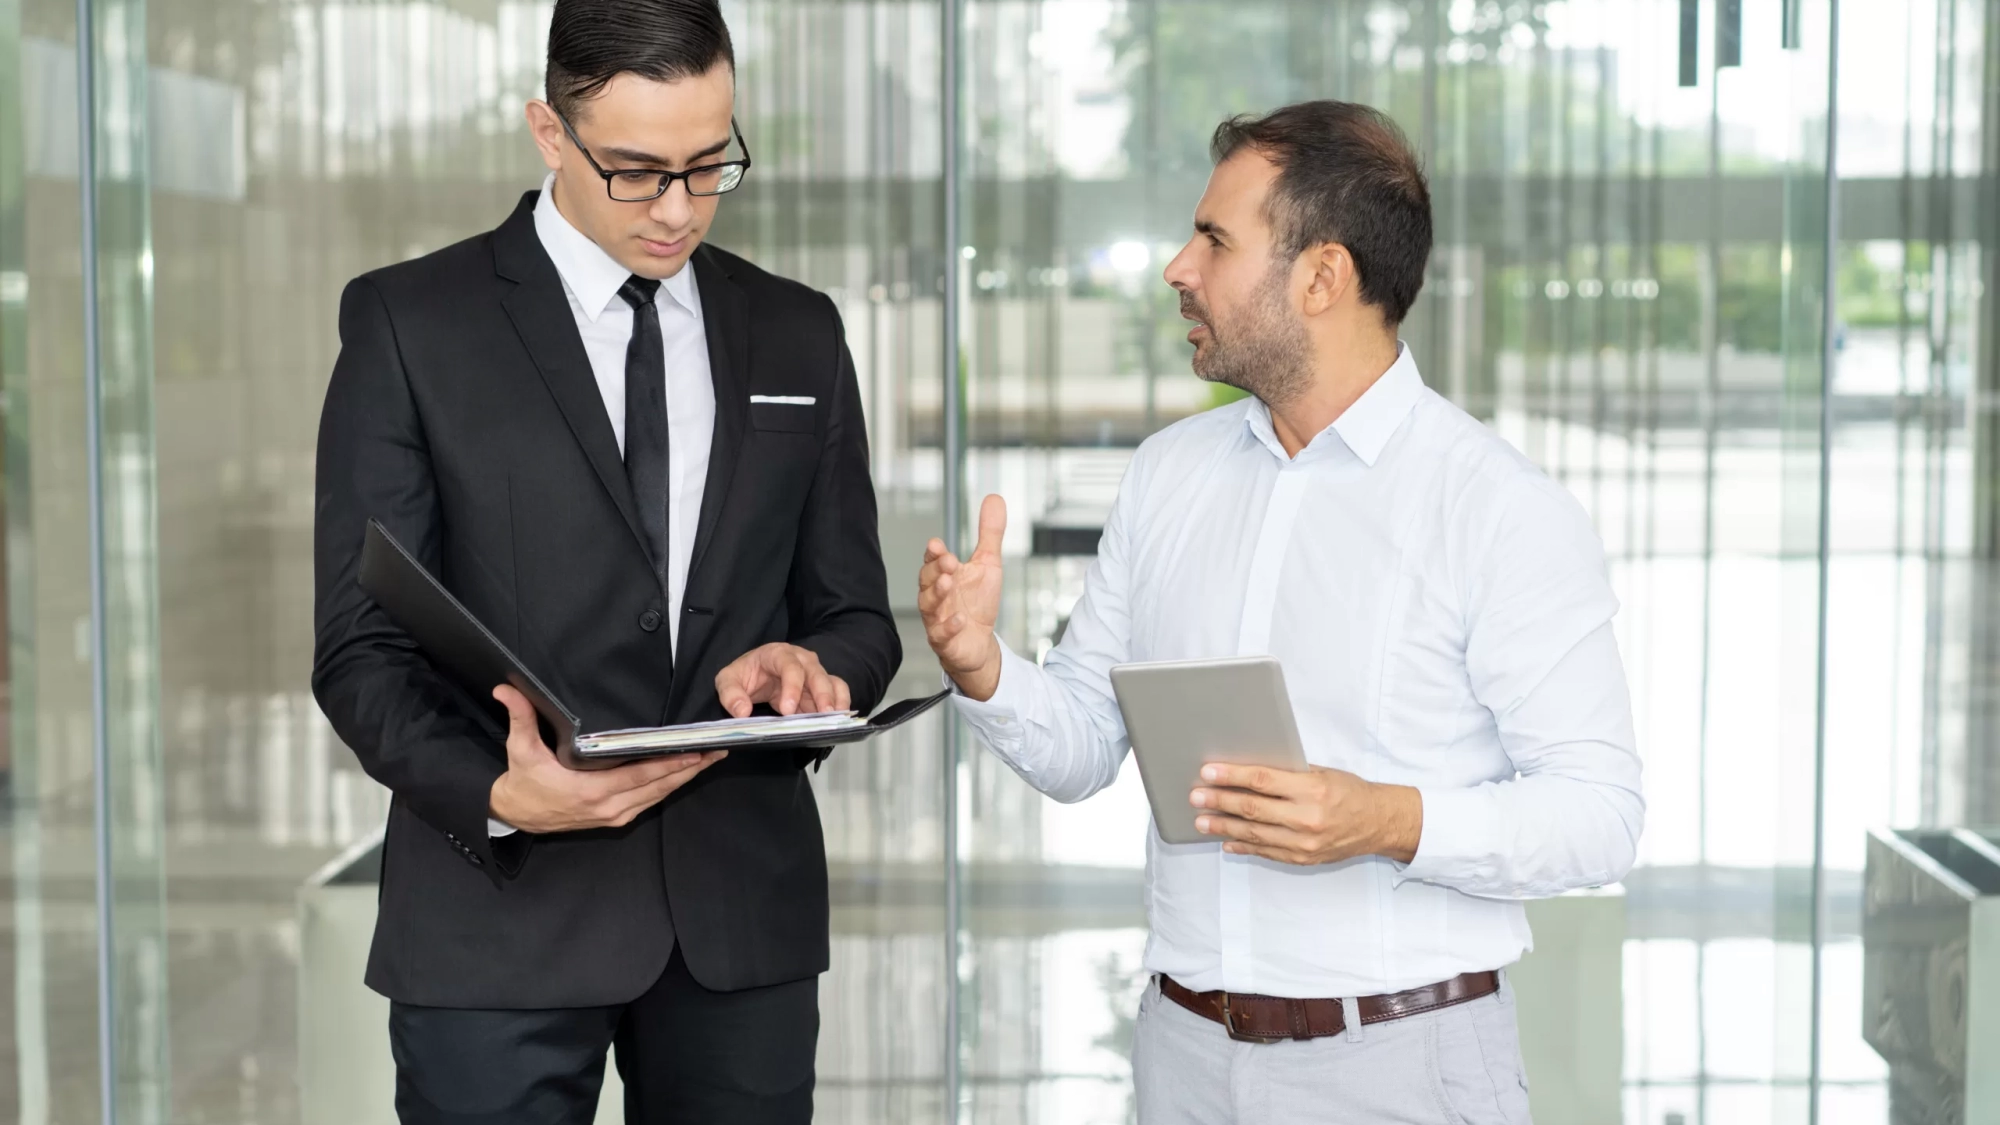 Emotional businessman with tablet computer proving his point to coworker. Financial manager reading document when listening to arguments of his colleague. Business conversation concept